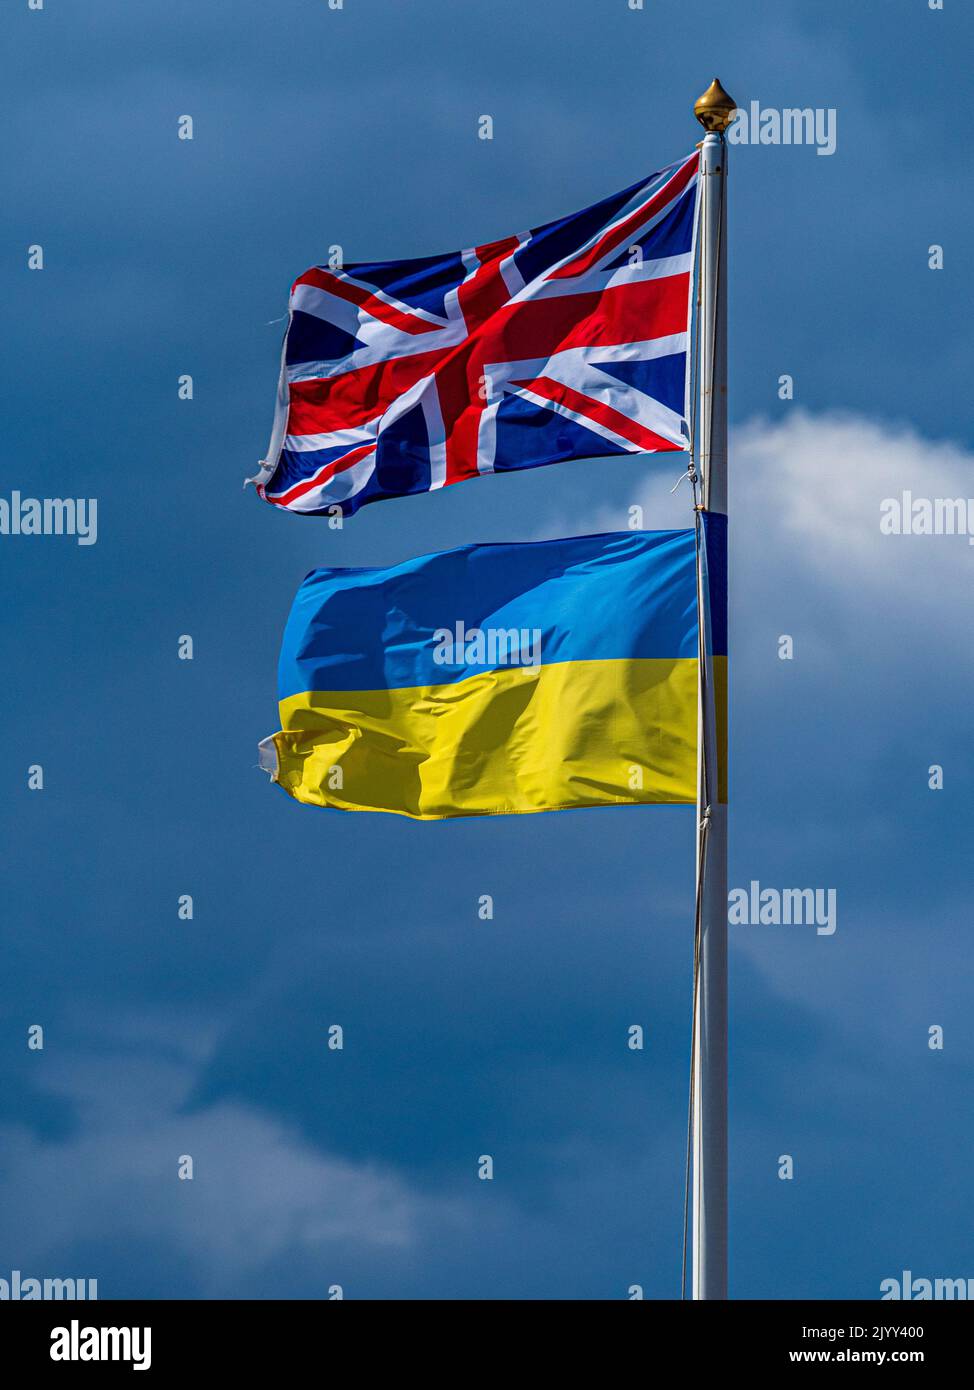 UK and Ukraine flags fly together in a display of solidarity. British and Ukrainian Flags.  British and Ukraine flag display. Stock Photo